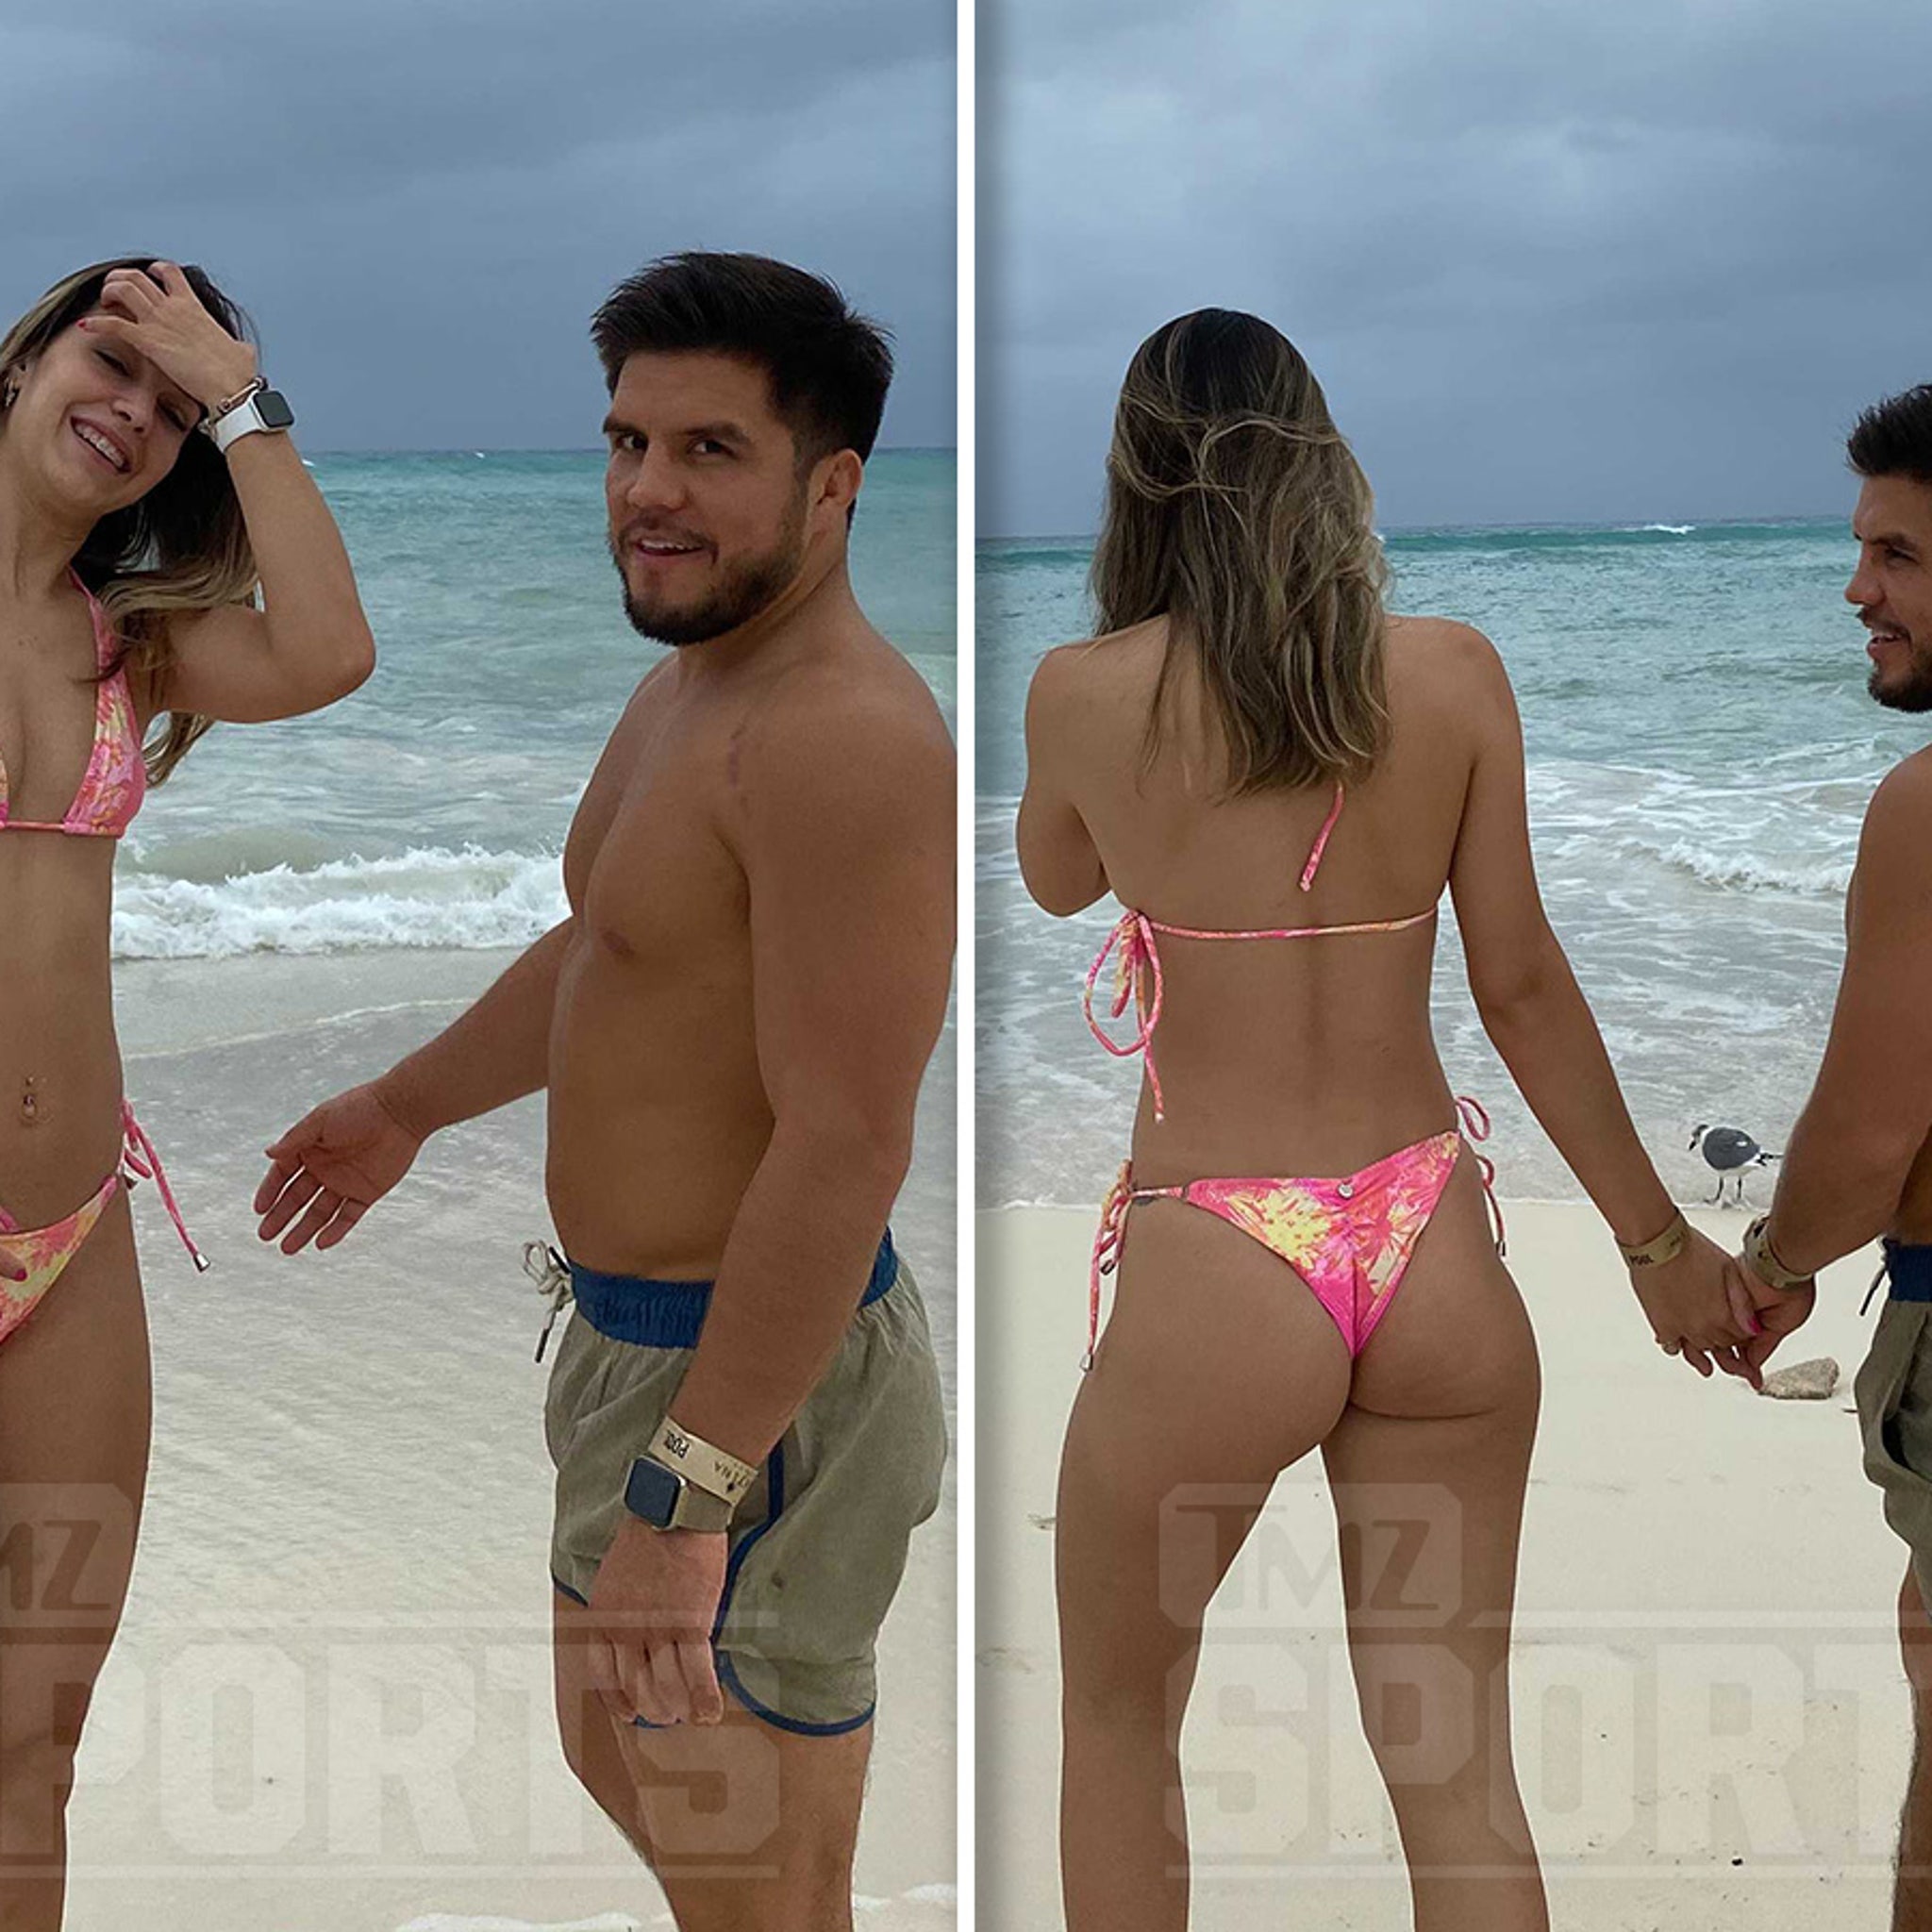 UFCs Henry Cejudo Hits the Beach with Smokin Hot New Lady, Brazilian Model! image image picture